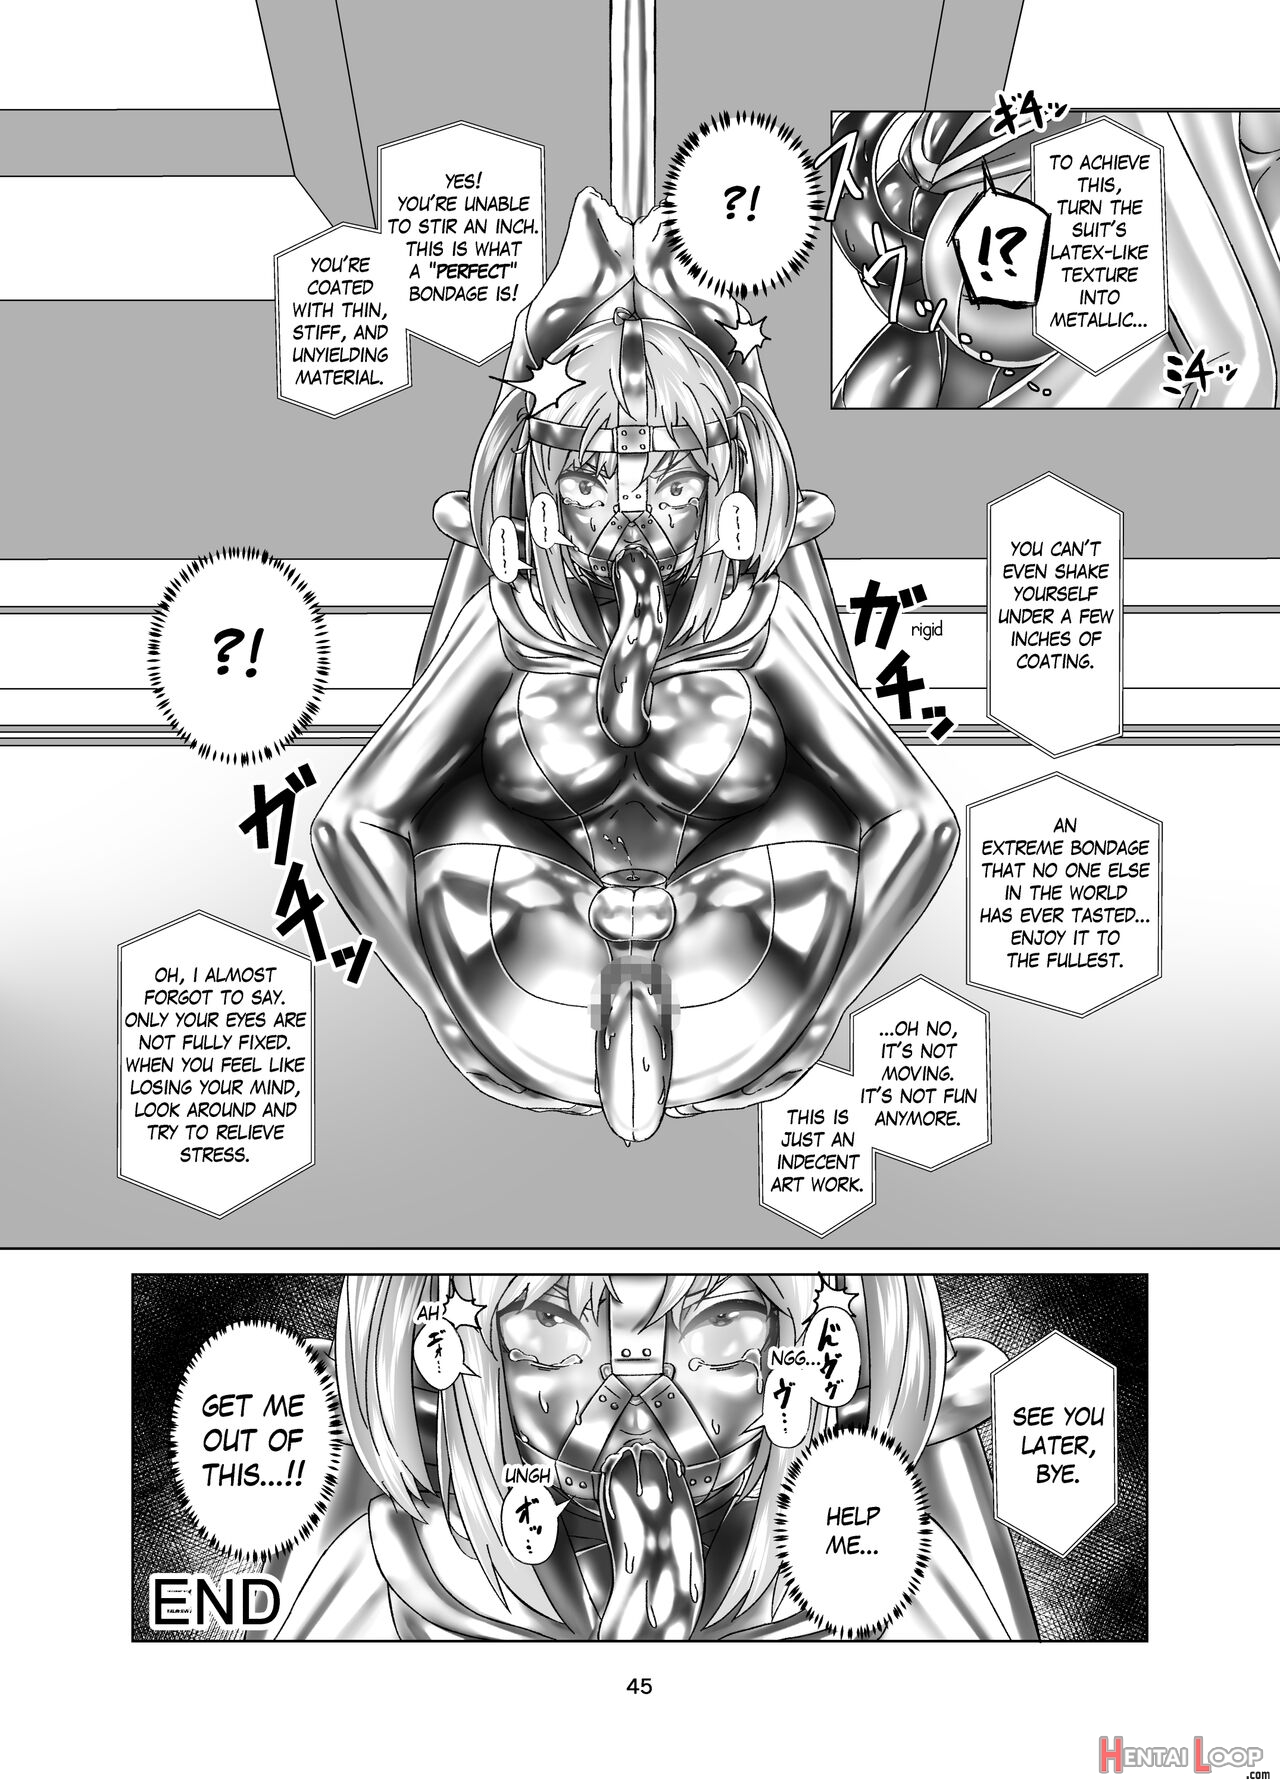 Extreme Bondage And Mesuiki Costume Test With You page 45